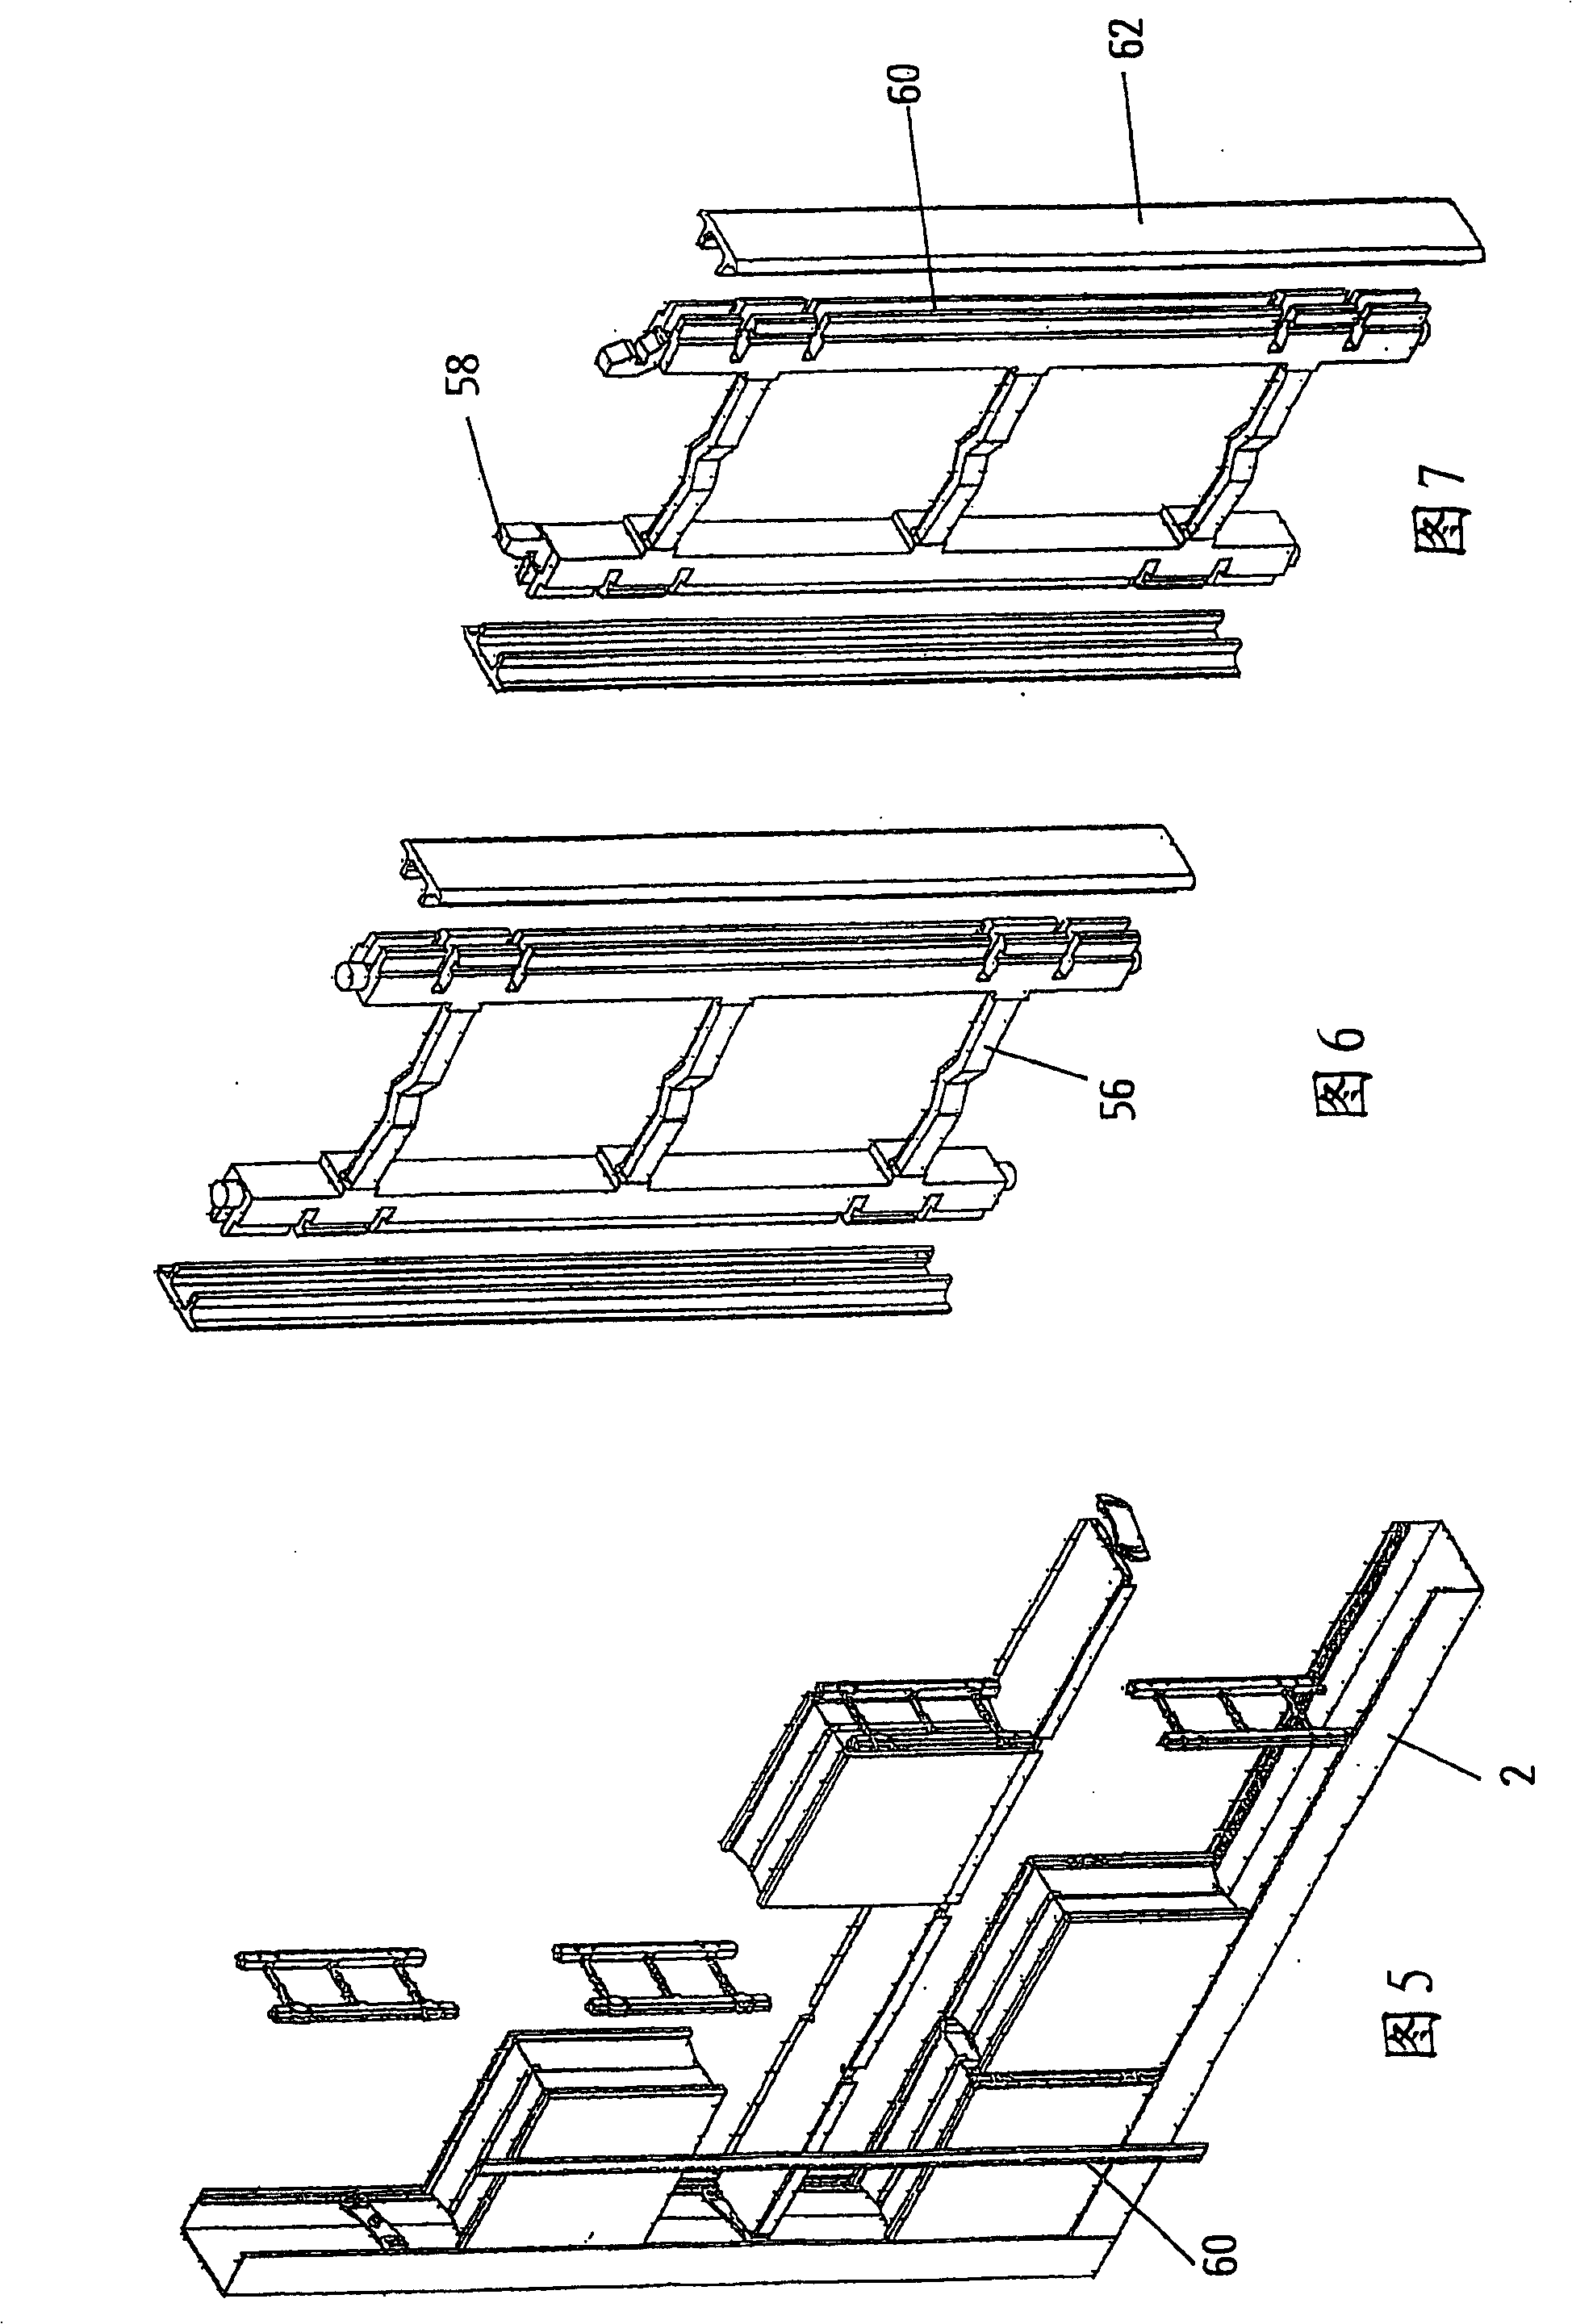 Complex of structural elements for forming glass brick walls